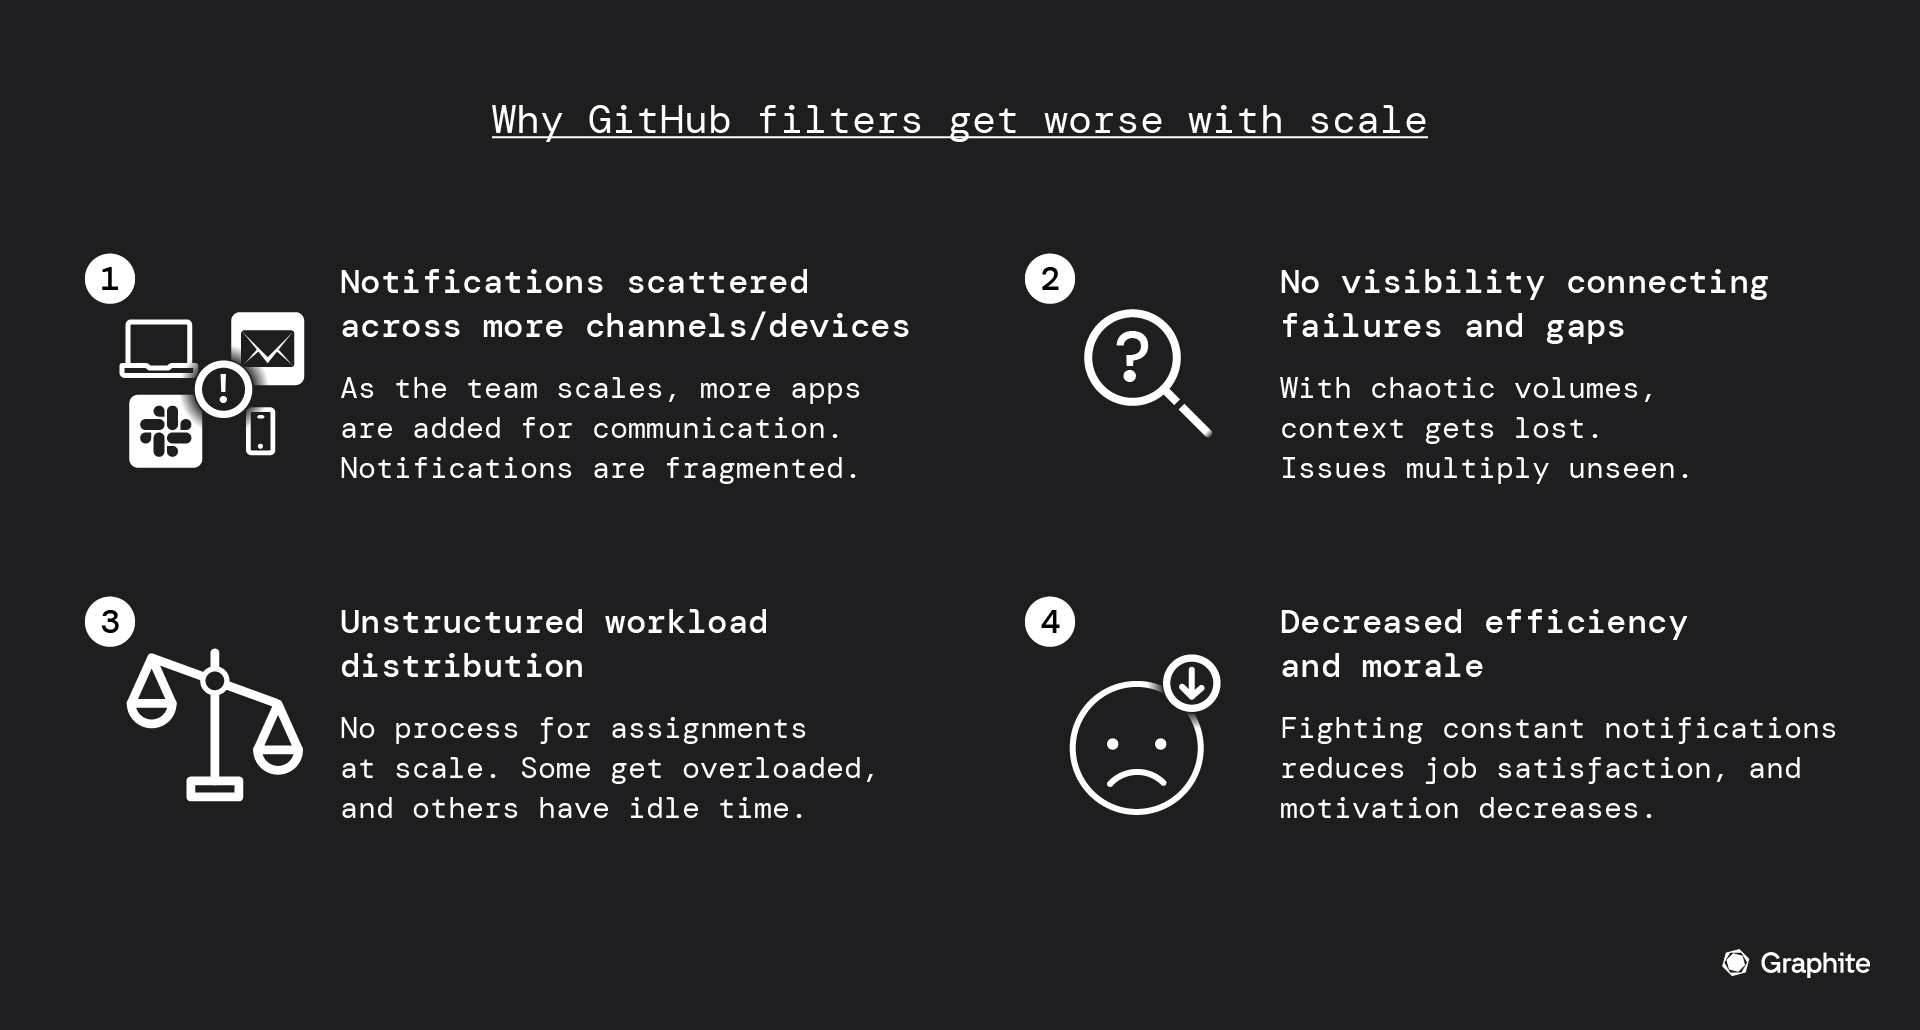 four descriptions of why GitHub filters get worse with scale: notifications scattered across channels, unstructured workload distribution, no visibility connecting features, and decreased efficiency and morale